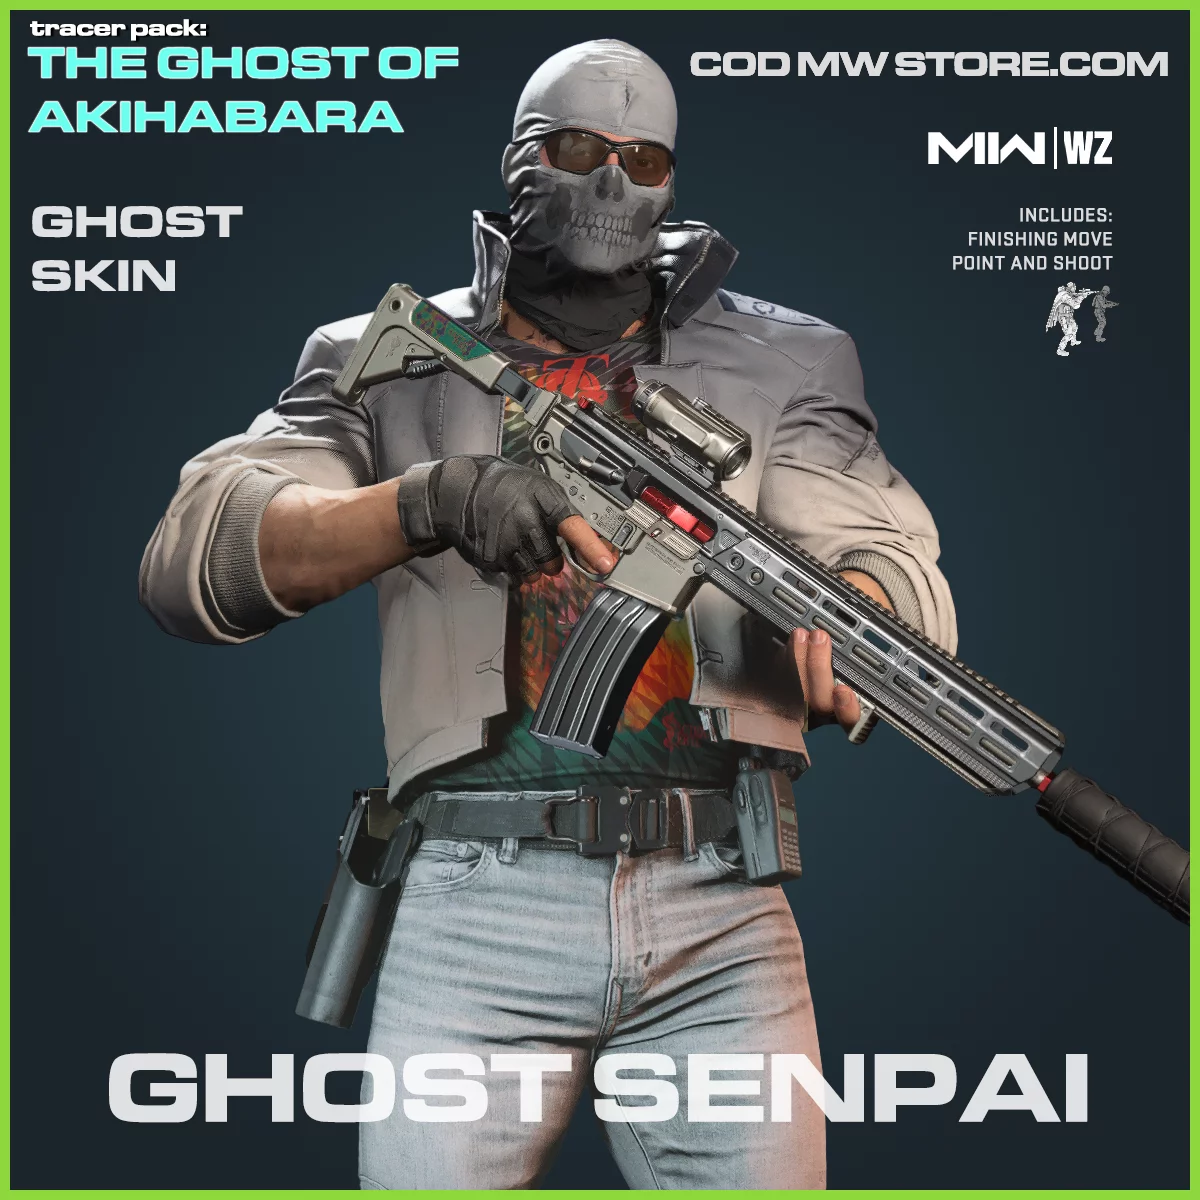 Tracer Pack: The Ghost of Akihabara - Warzone & MW3 Bundle